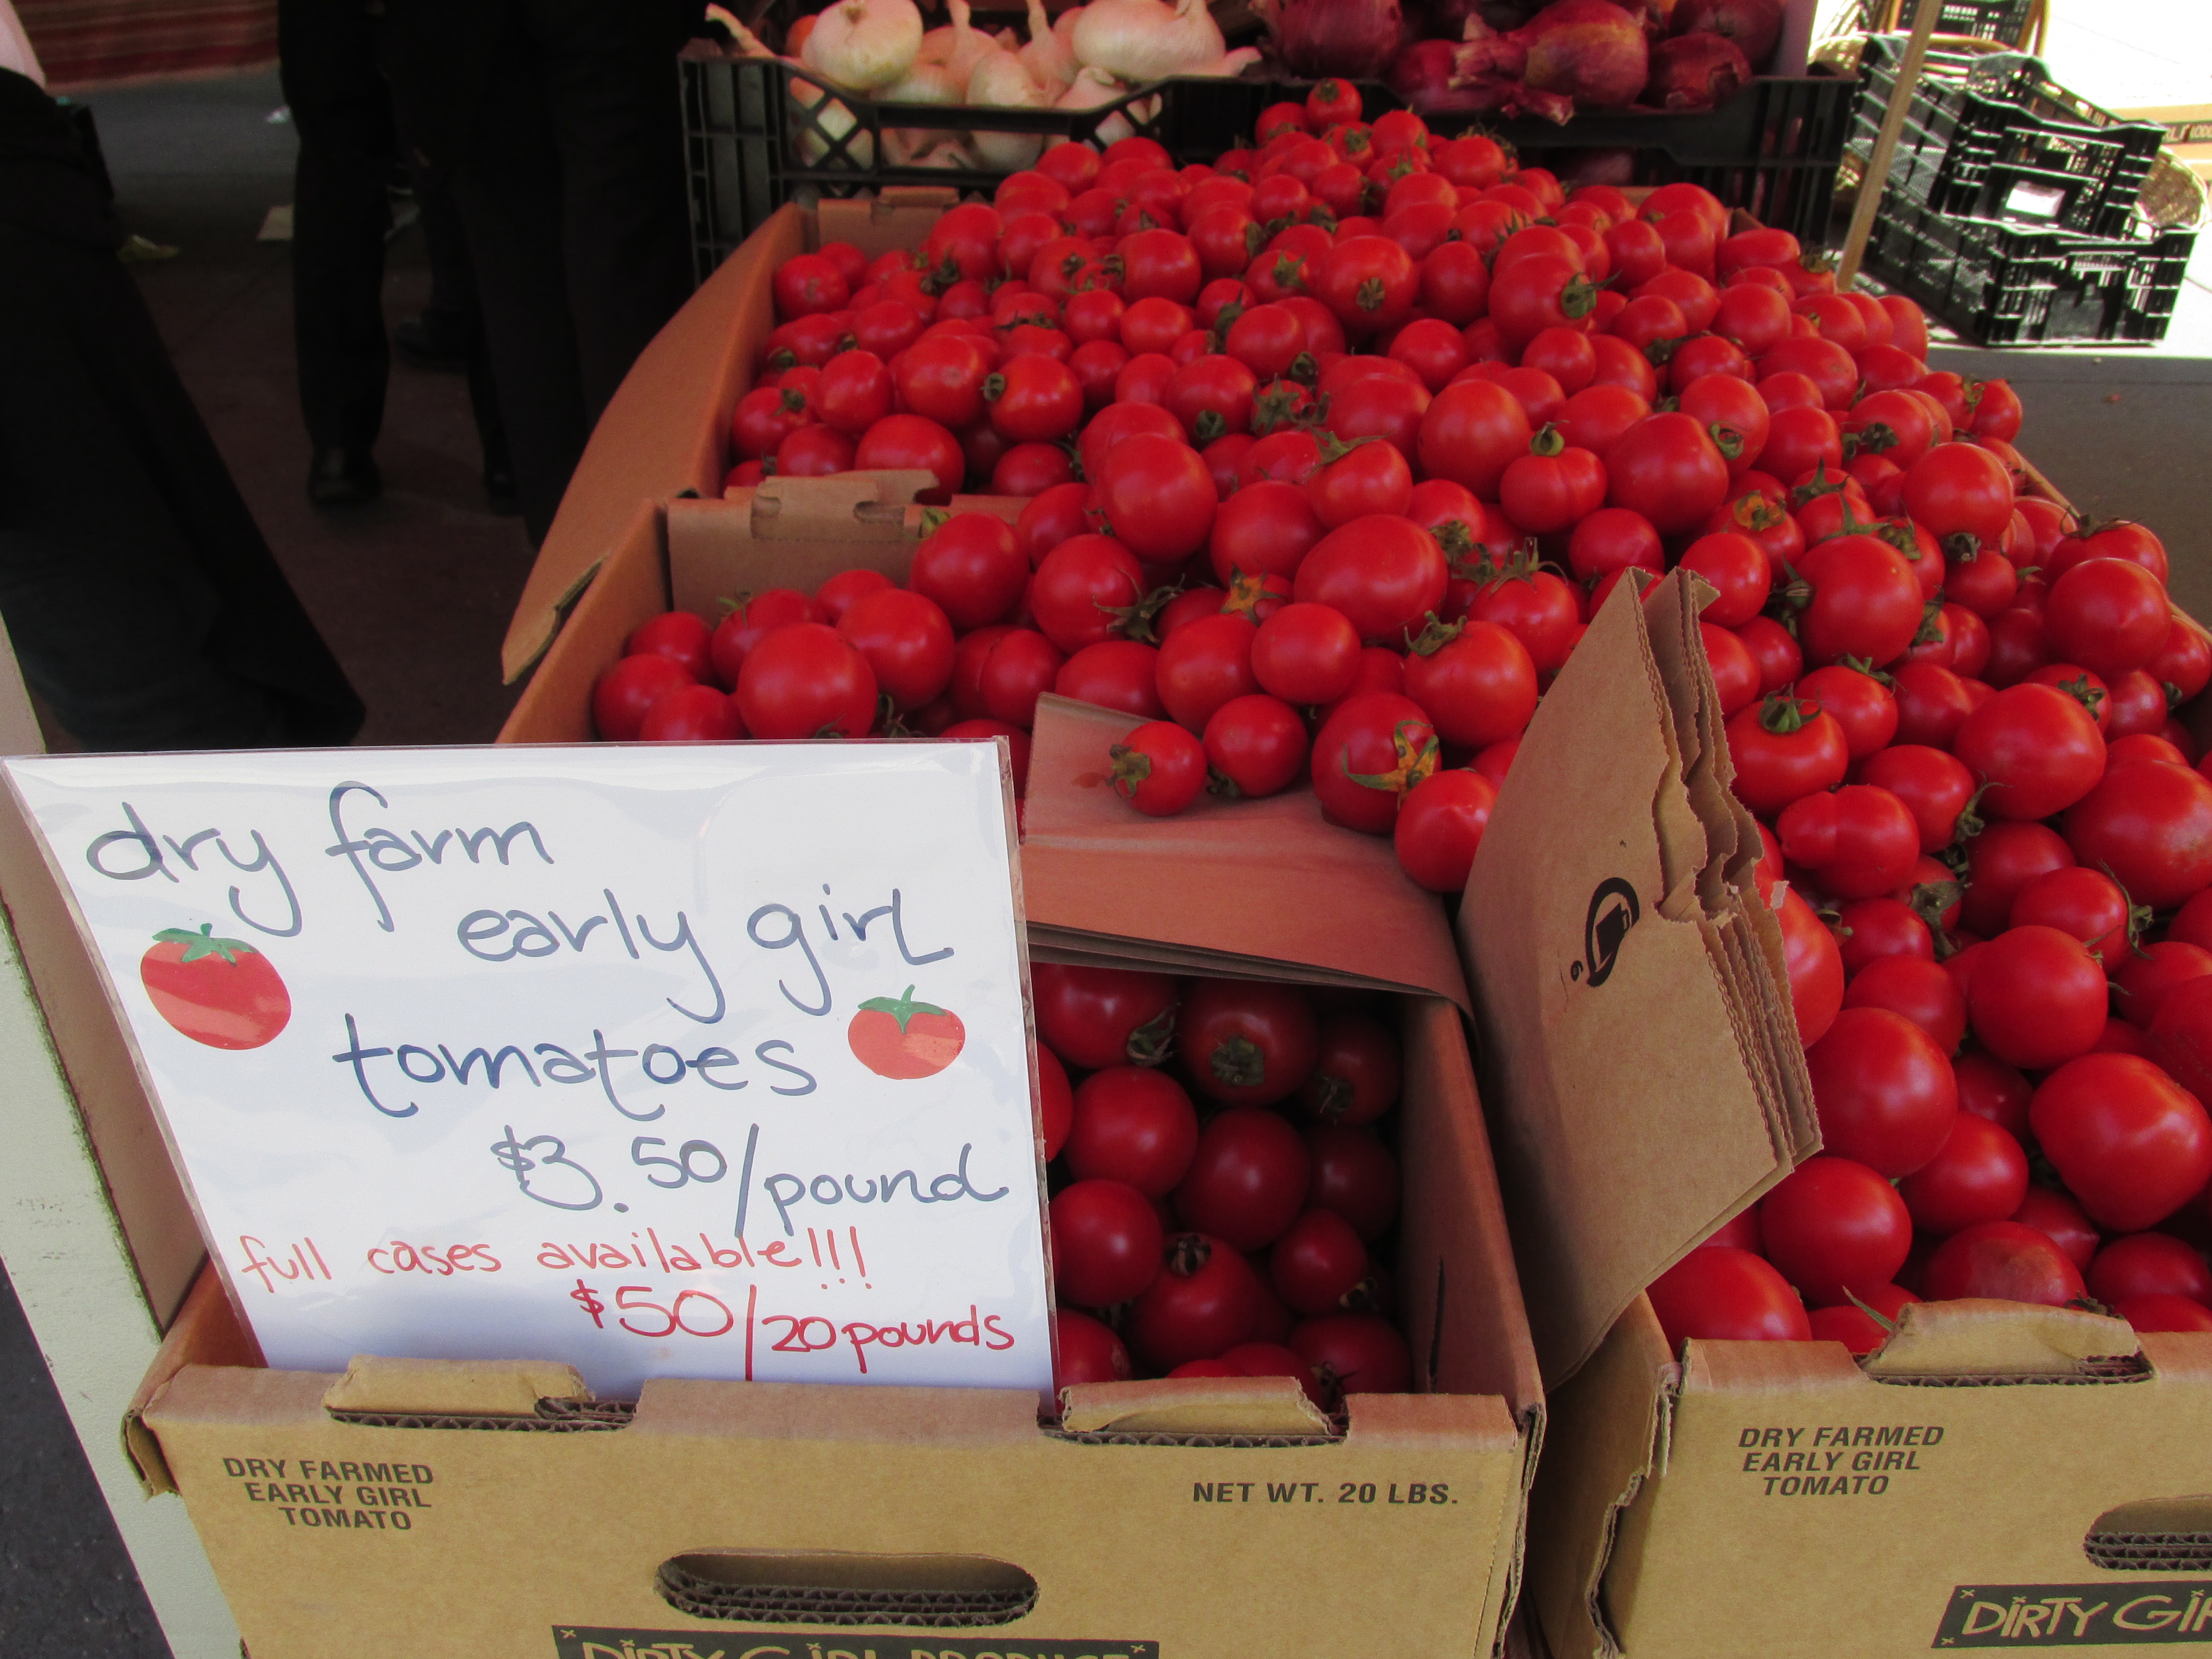 Customers at the farmer's market in San Francisco's ferry building were snapping up these tomatoes from Dirty Girl Produce, grown without irrigation.